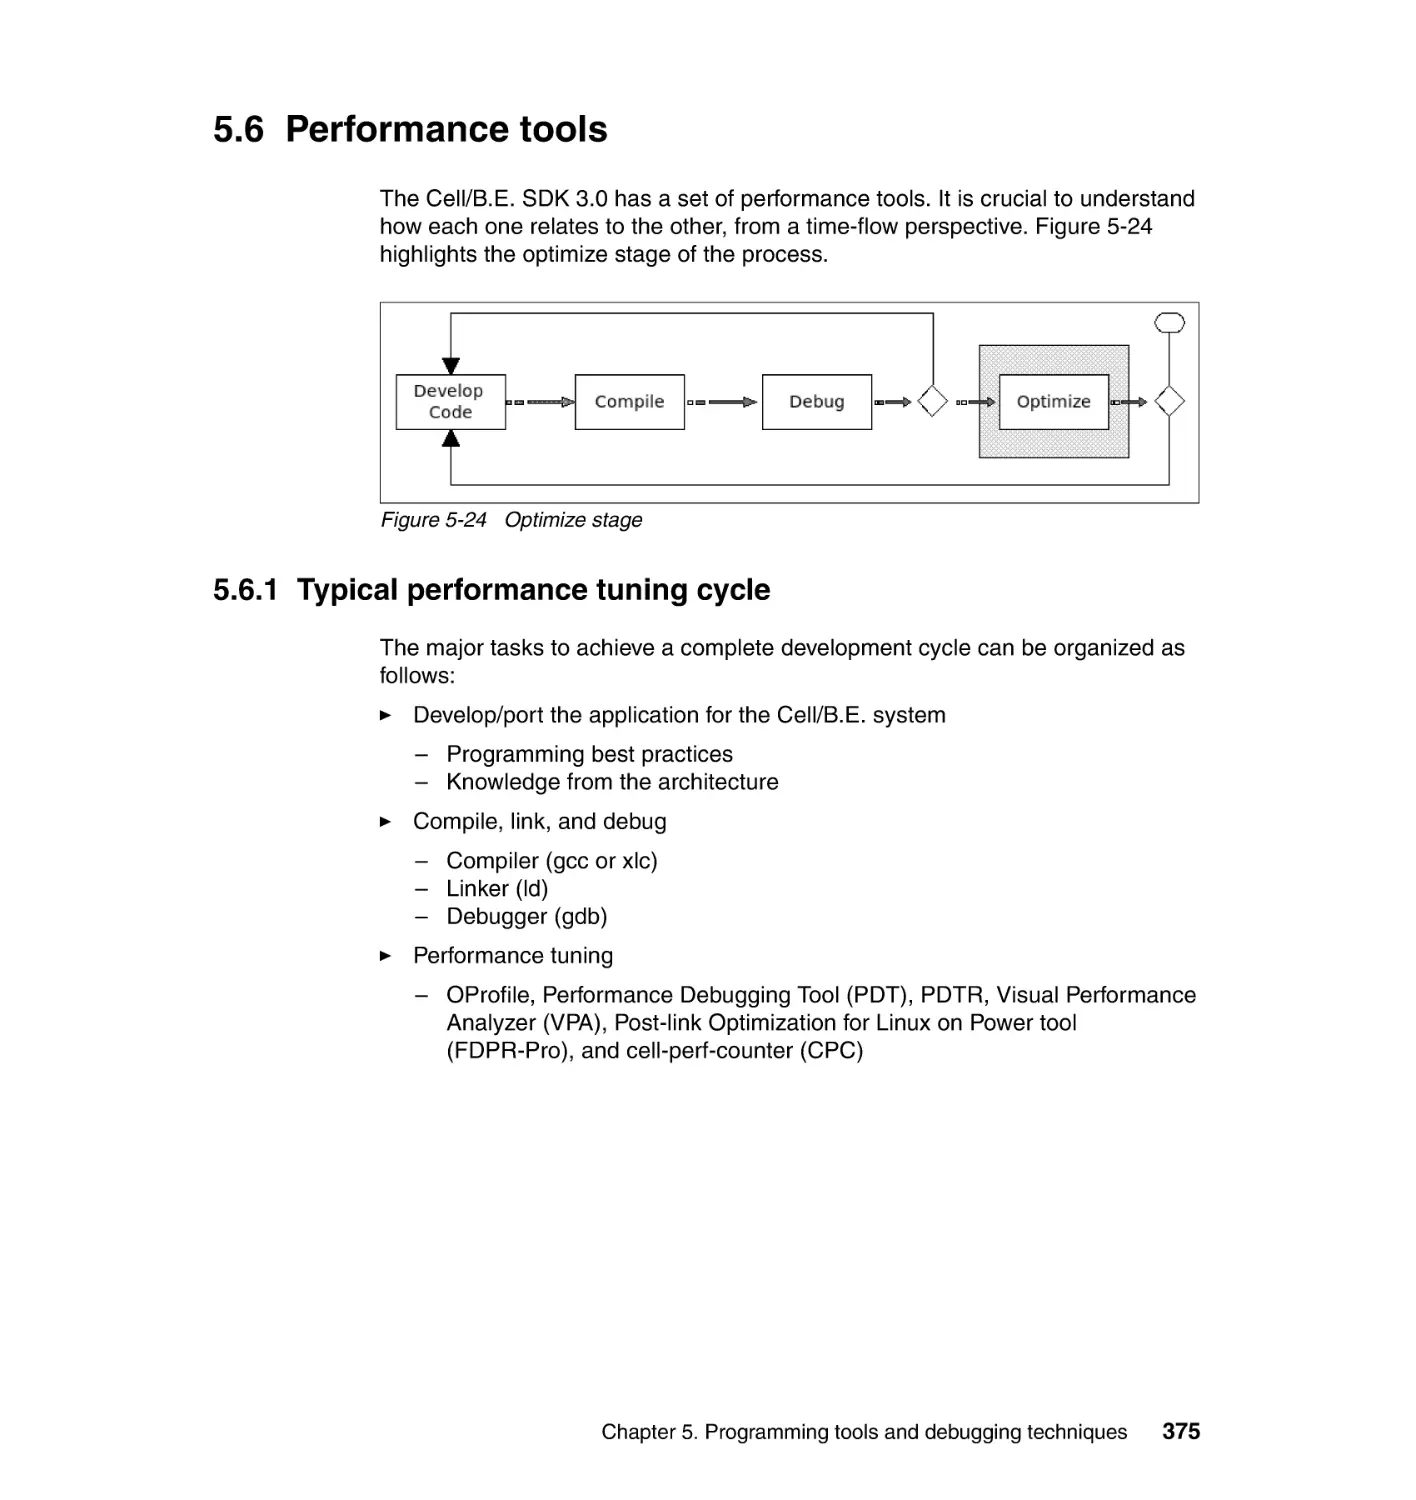 5.6 Performance tools
5.6.1 Typical performance tuning cycle